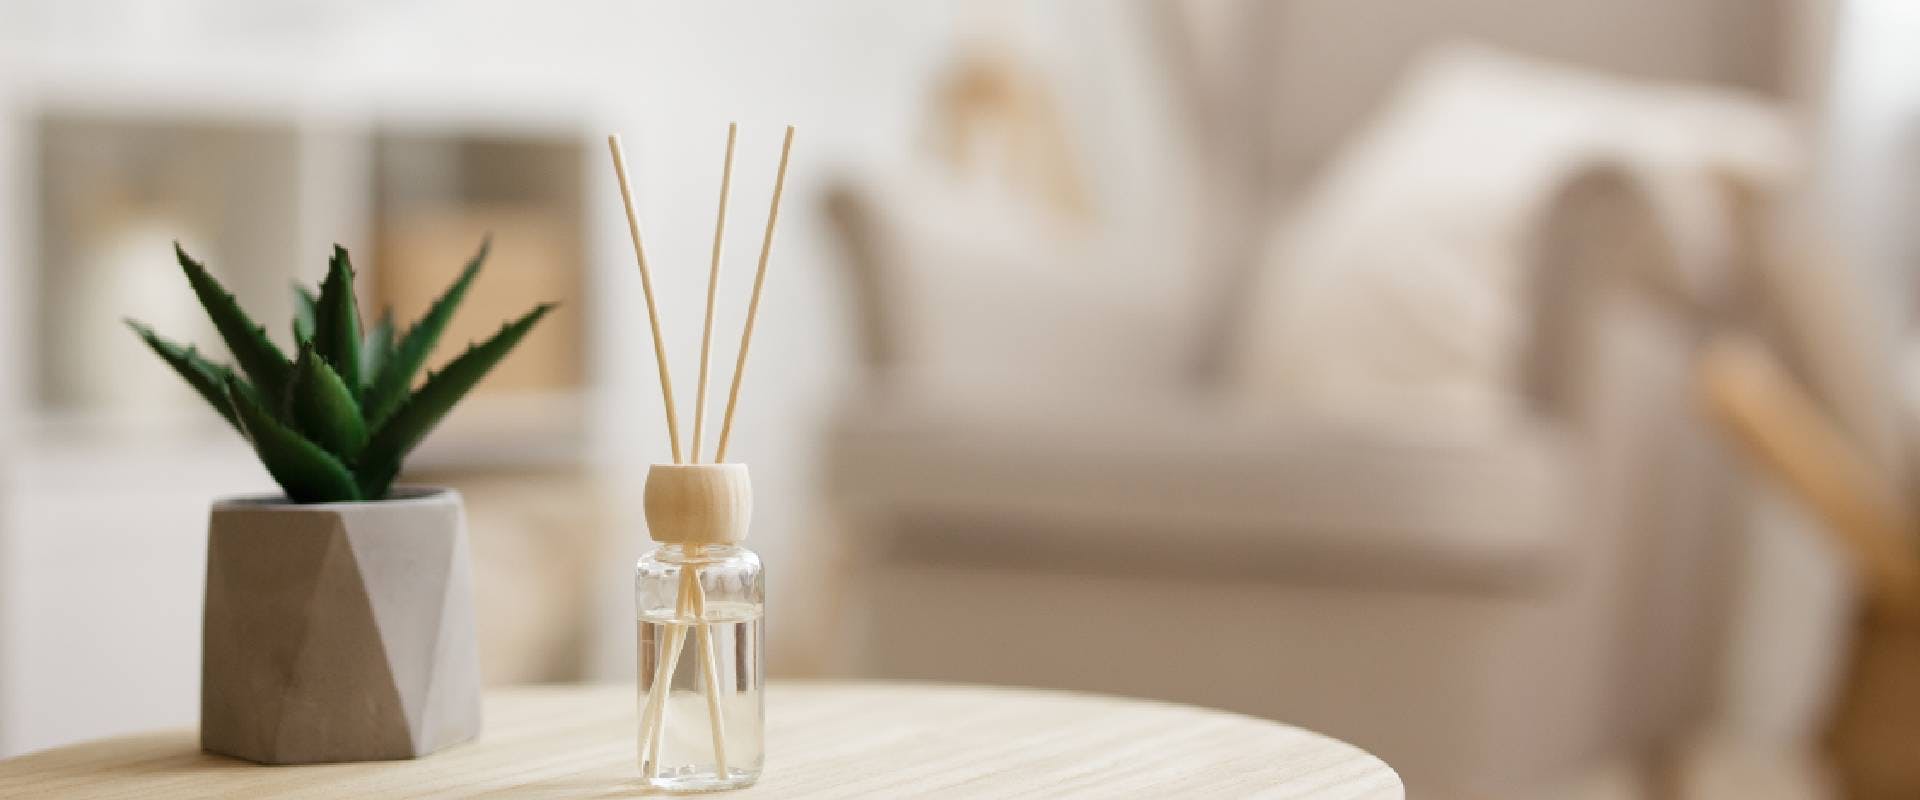 Close-up of reed diffuser and house plant aloe vera on wooden table in bright living room